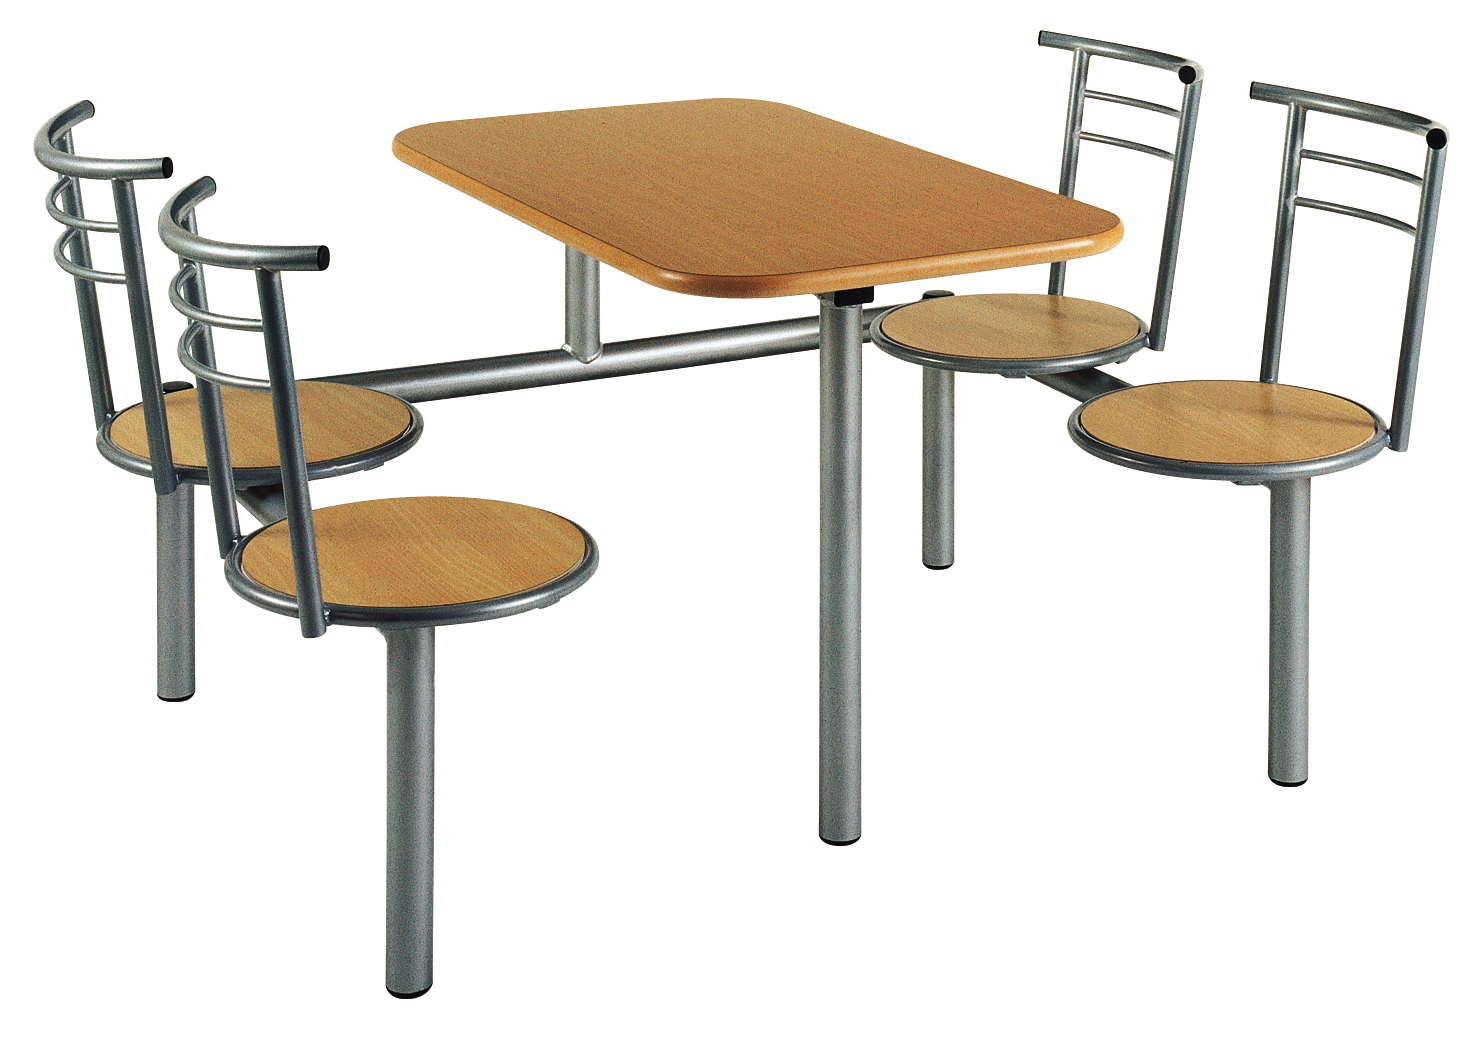 Fixed seating fast food table (CU24)